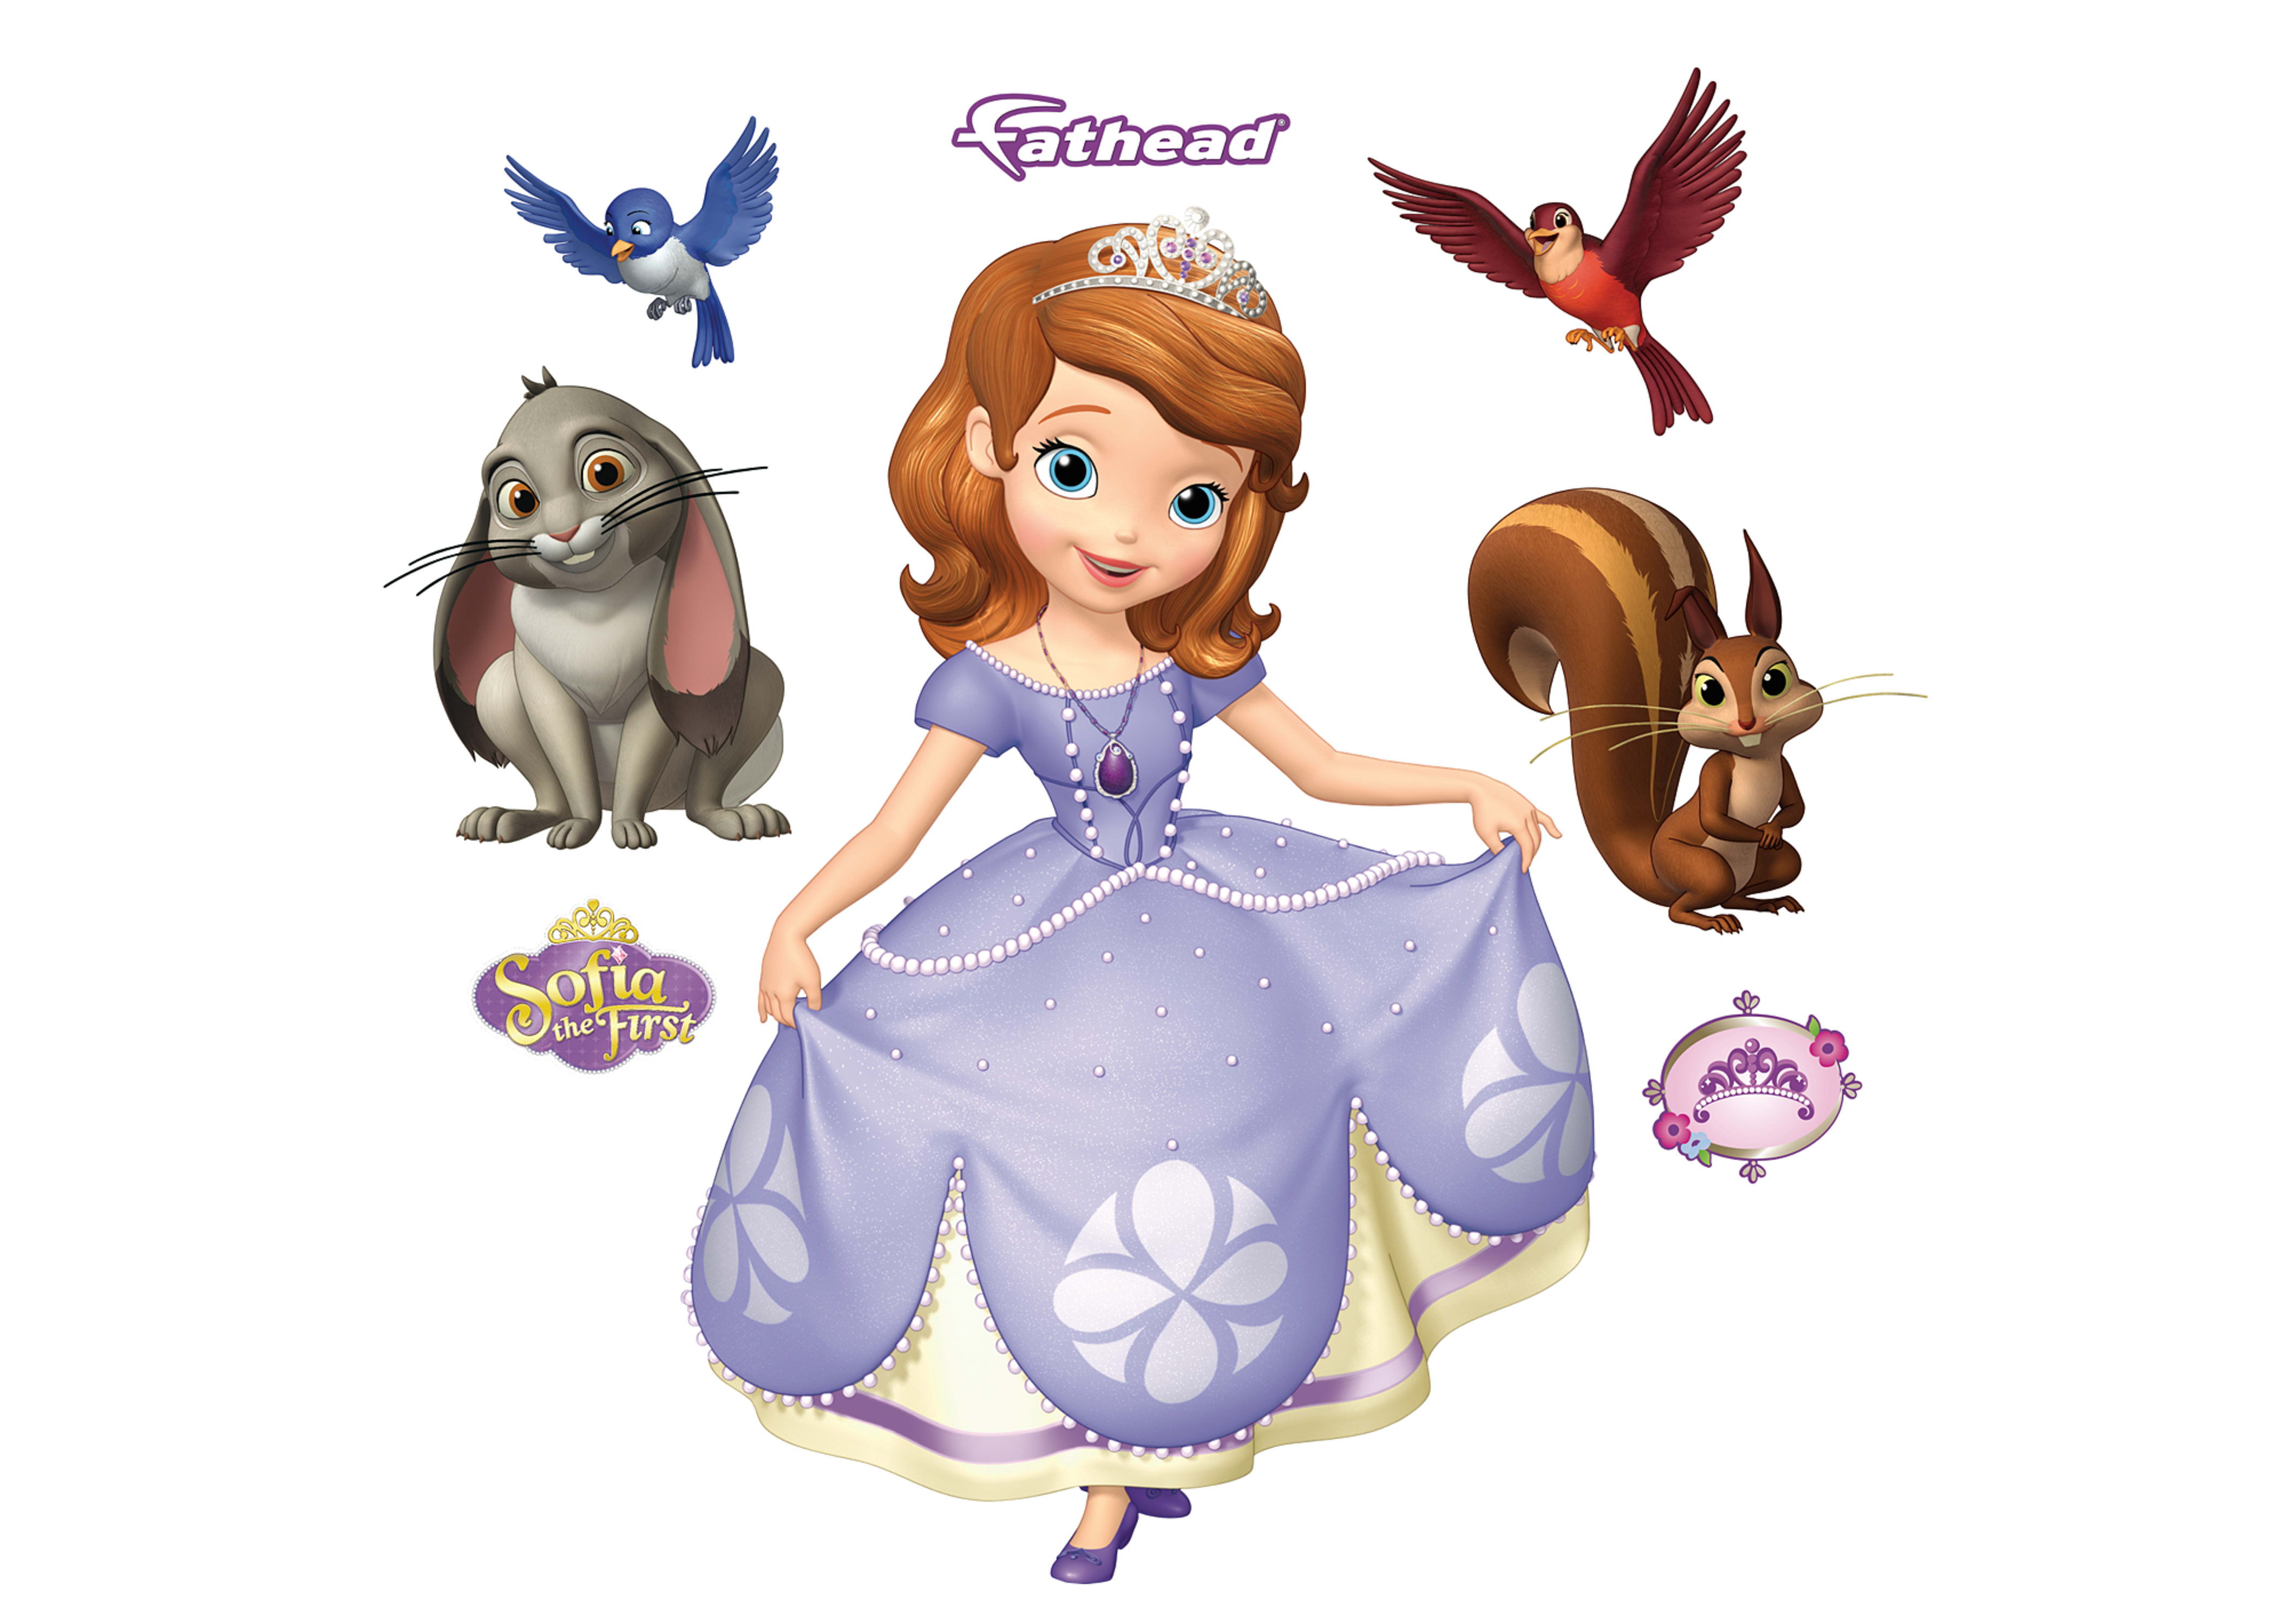 Here you can download and print this simple disney sofia the first hd wallp...